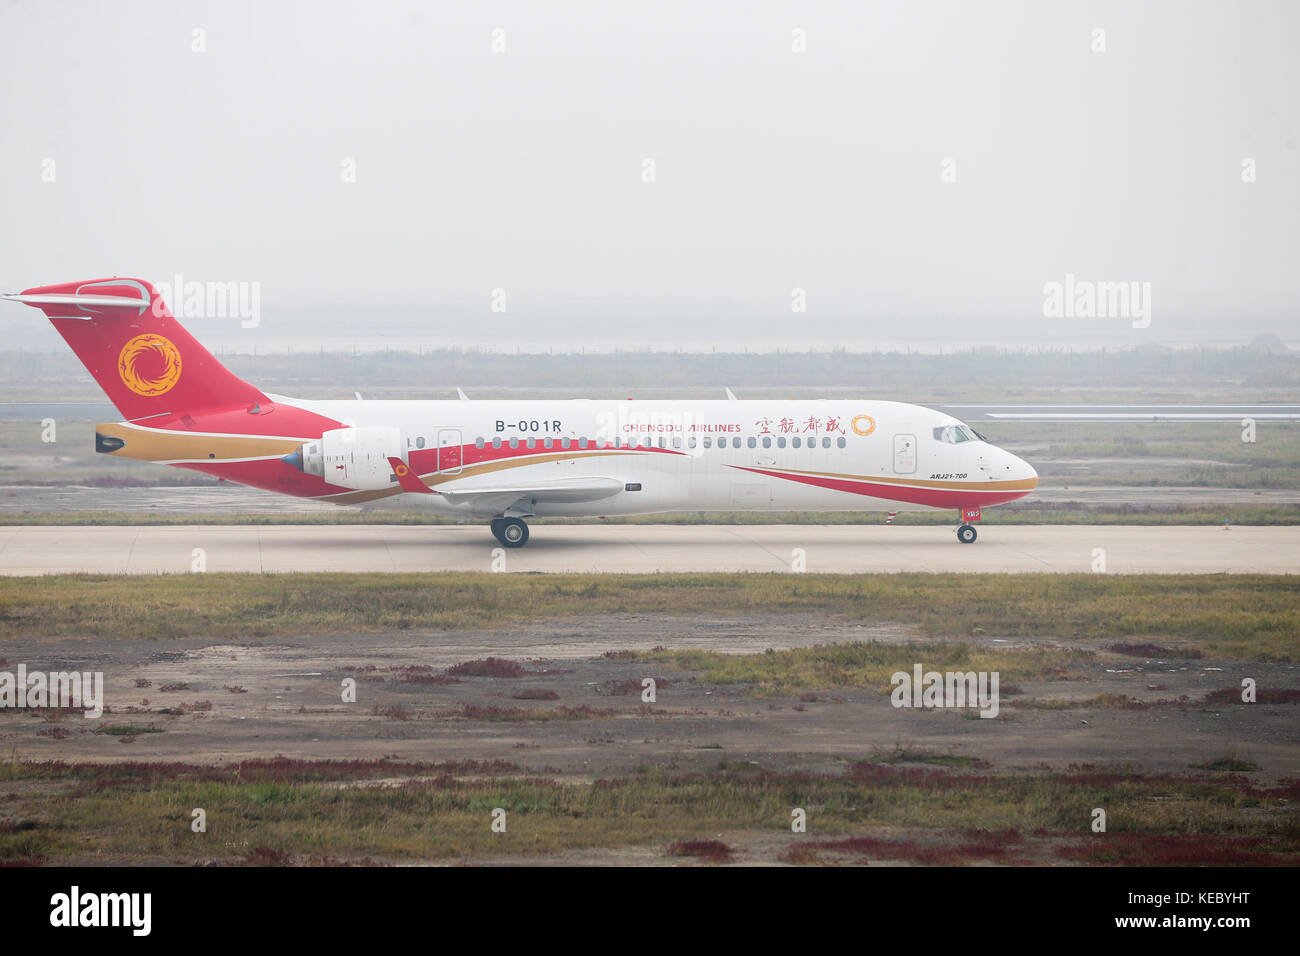 (171019) -- SHANGHAI, Oct. 19, 2017 (Xinhua) -- Photo taken on Oct. 14, 2017 shows ARJ21-700 jetliner taxiing down a runway at Shengli Airport in Dongying of east China's Shandong Province. China's first domestic regional jetliner ARJ21-700 was delivered Thursday after its mass production was certified in July. The ARJ21-700 jetliner has 90 economy seats and was bought by China Aerospace Leasing Company, and delivered to Chengdu Airlines. The Commercial Aircraft Corporation of China (COMAC) obtained a production license to build the airliner from the General Administration of Civil Aviation. ( Stock Photo